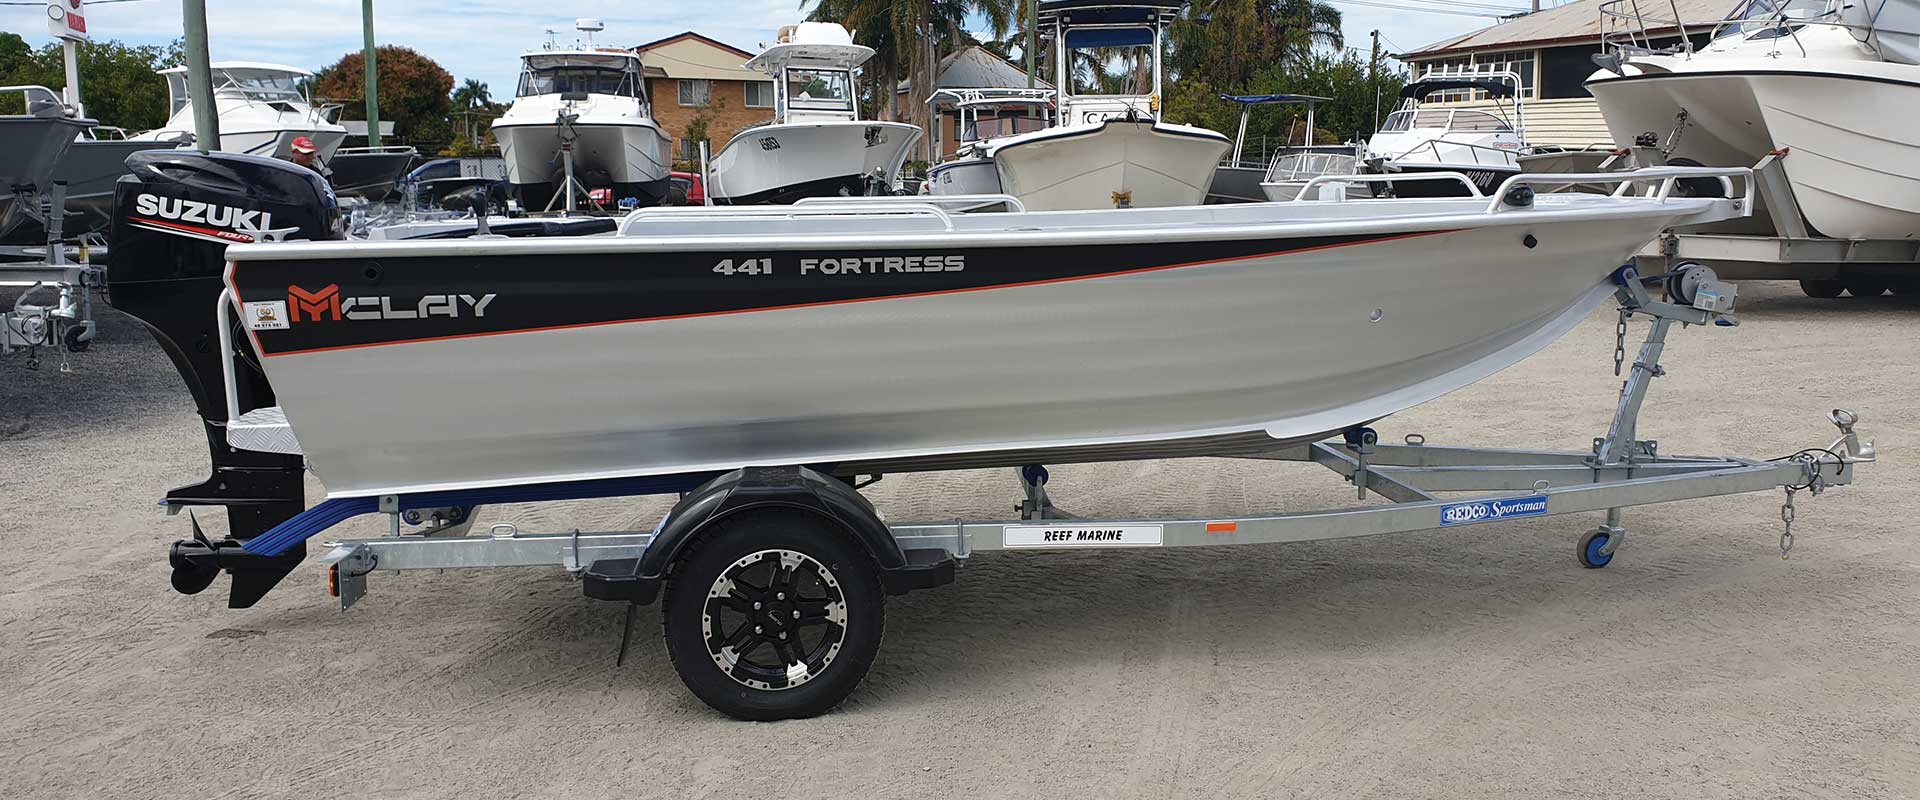 McLay Fortress 441 Dingy